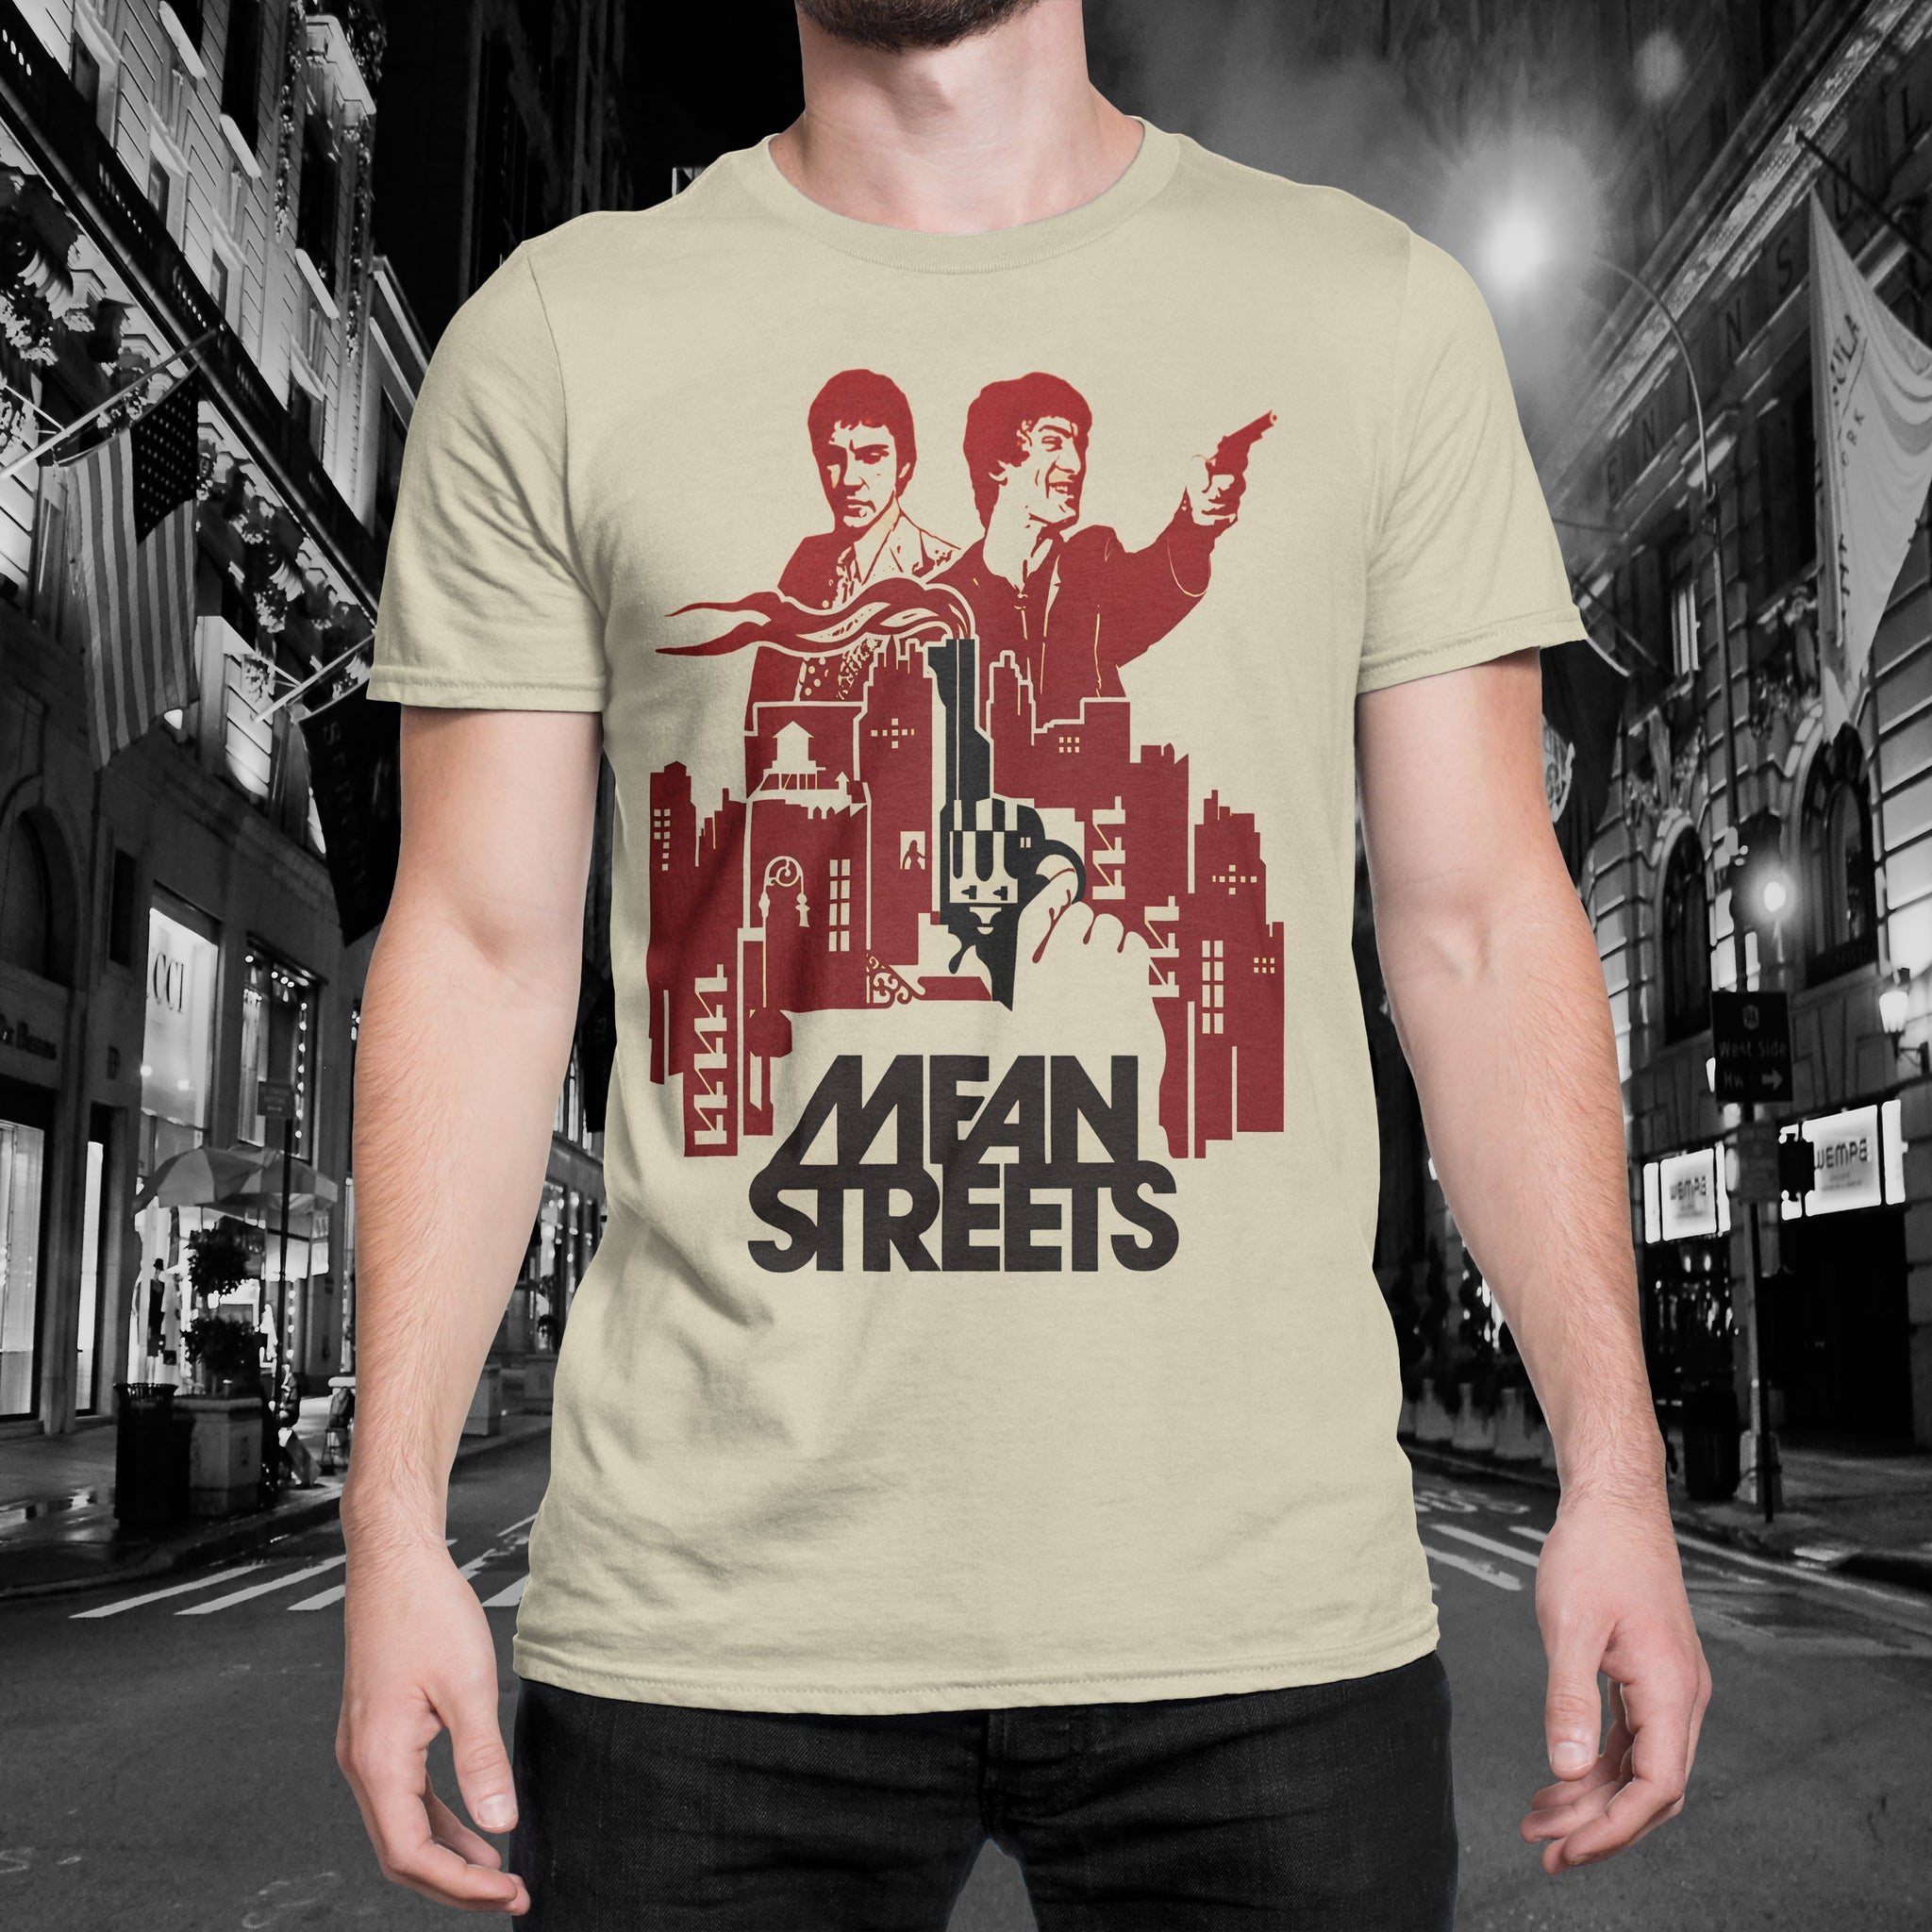 Mean Streets "Charlie & Johnny" Tee